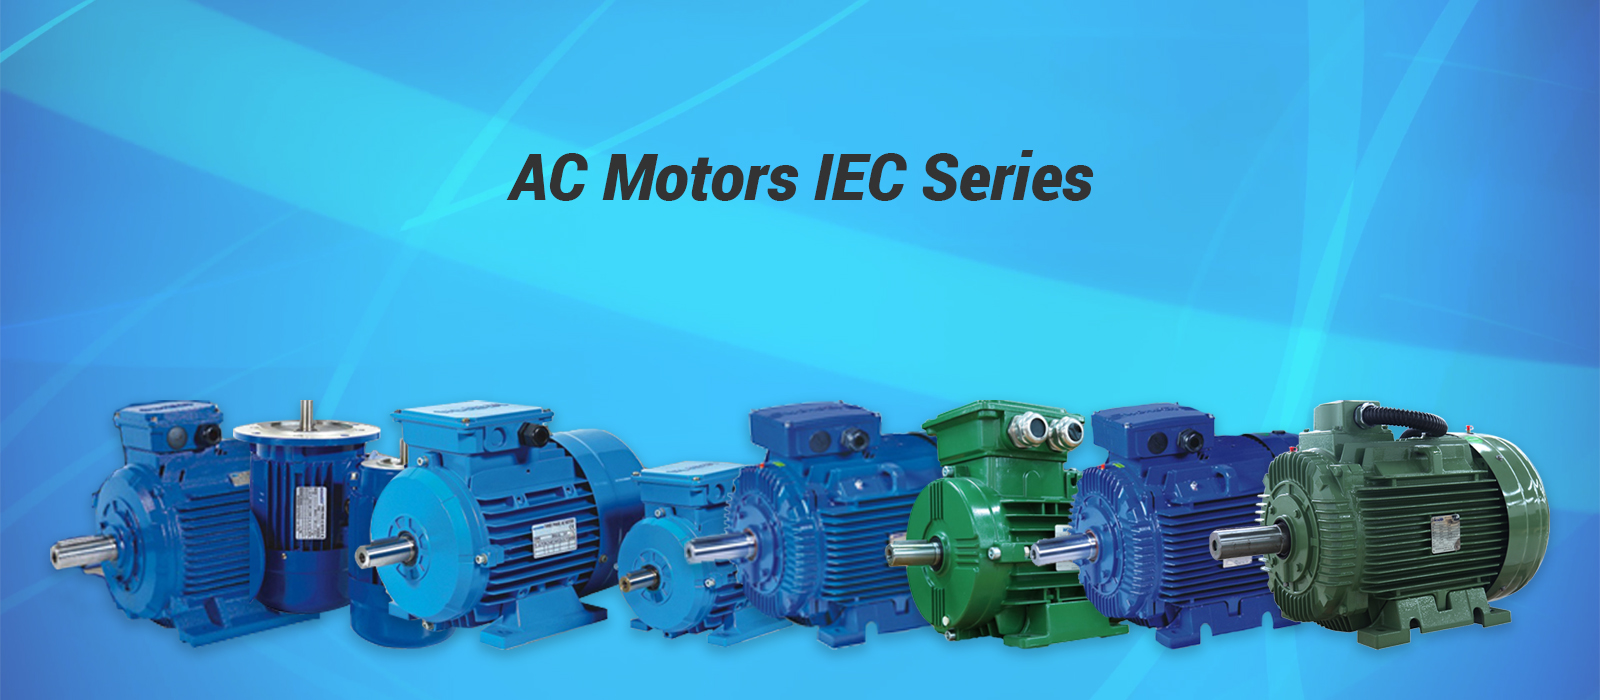 High Quality Electric Motor Suppliers - LUYANG Technology Co., Ltd.